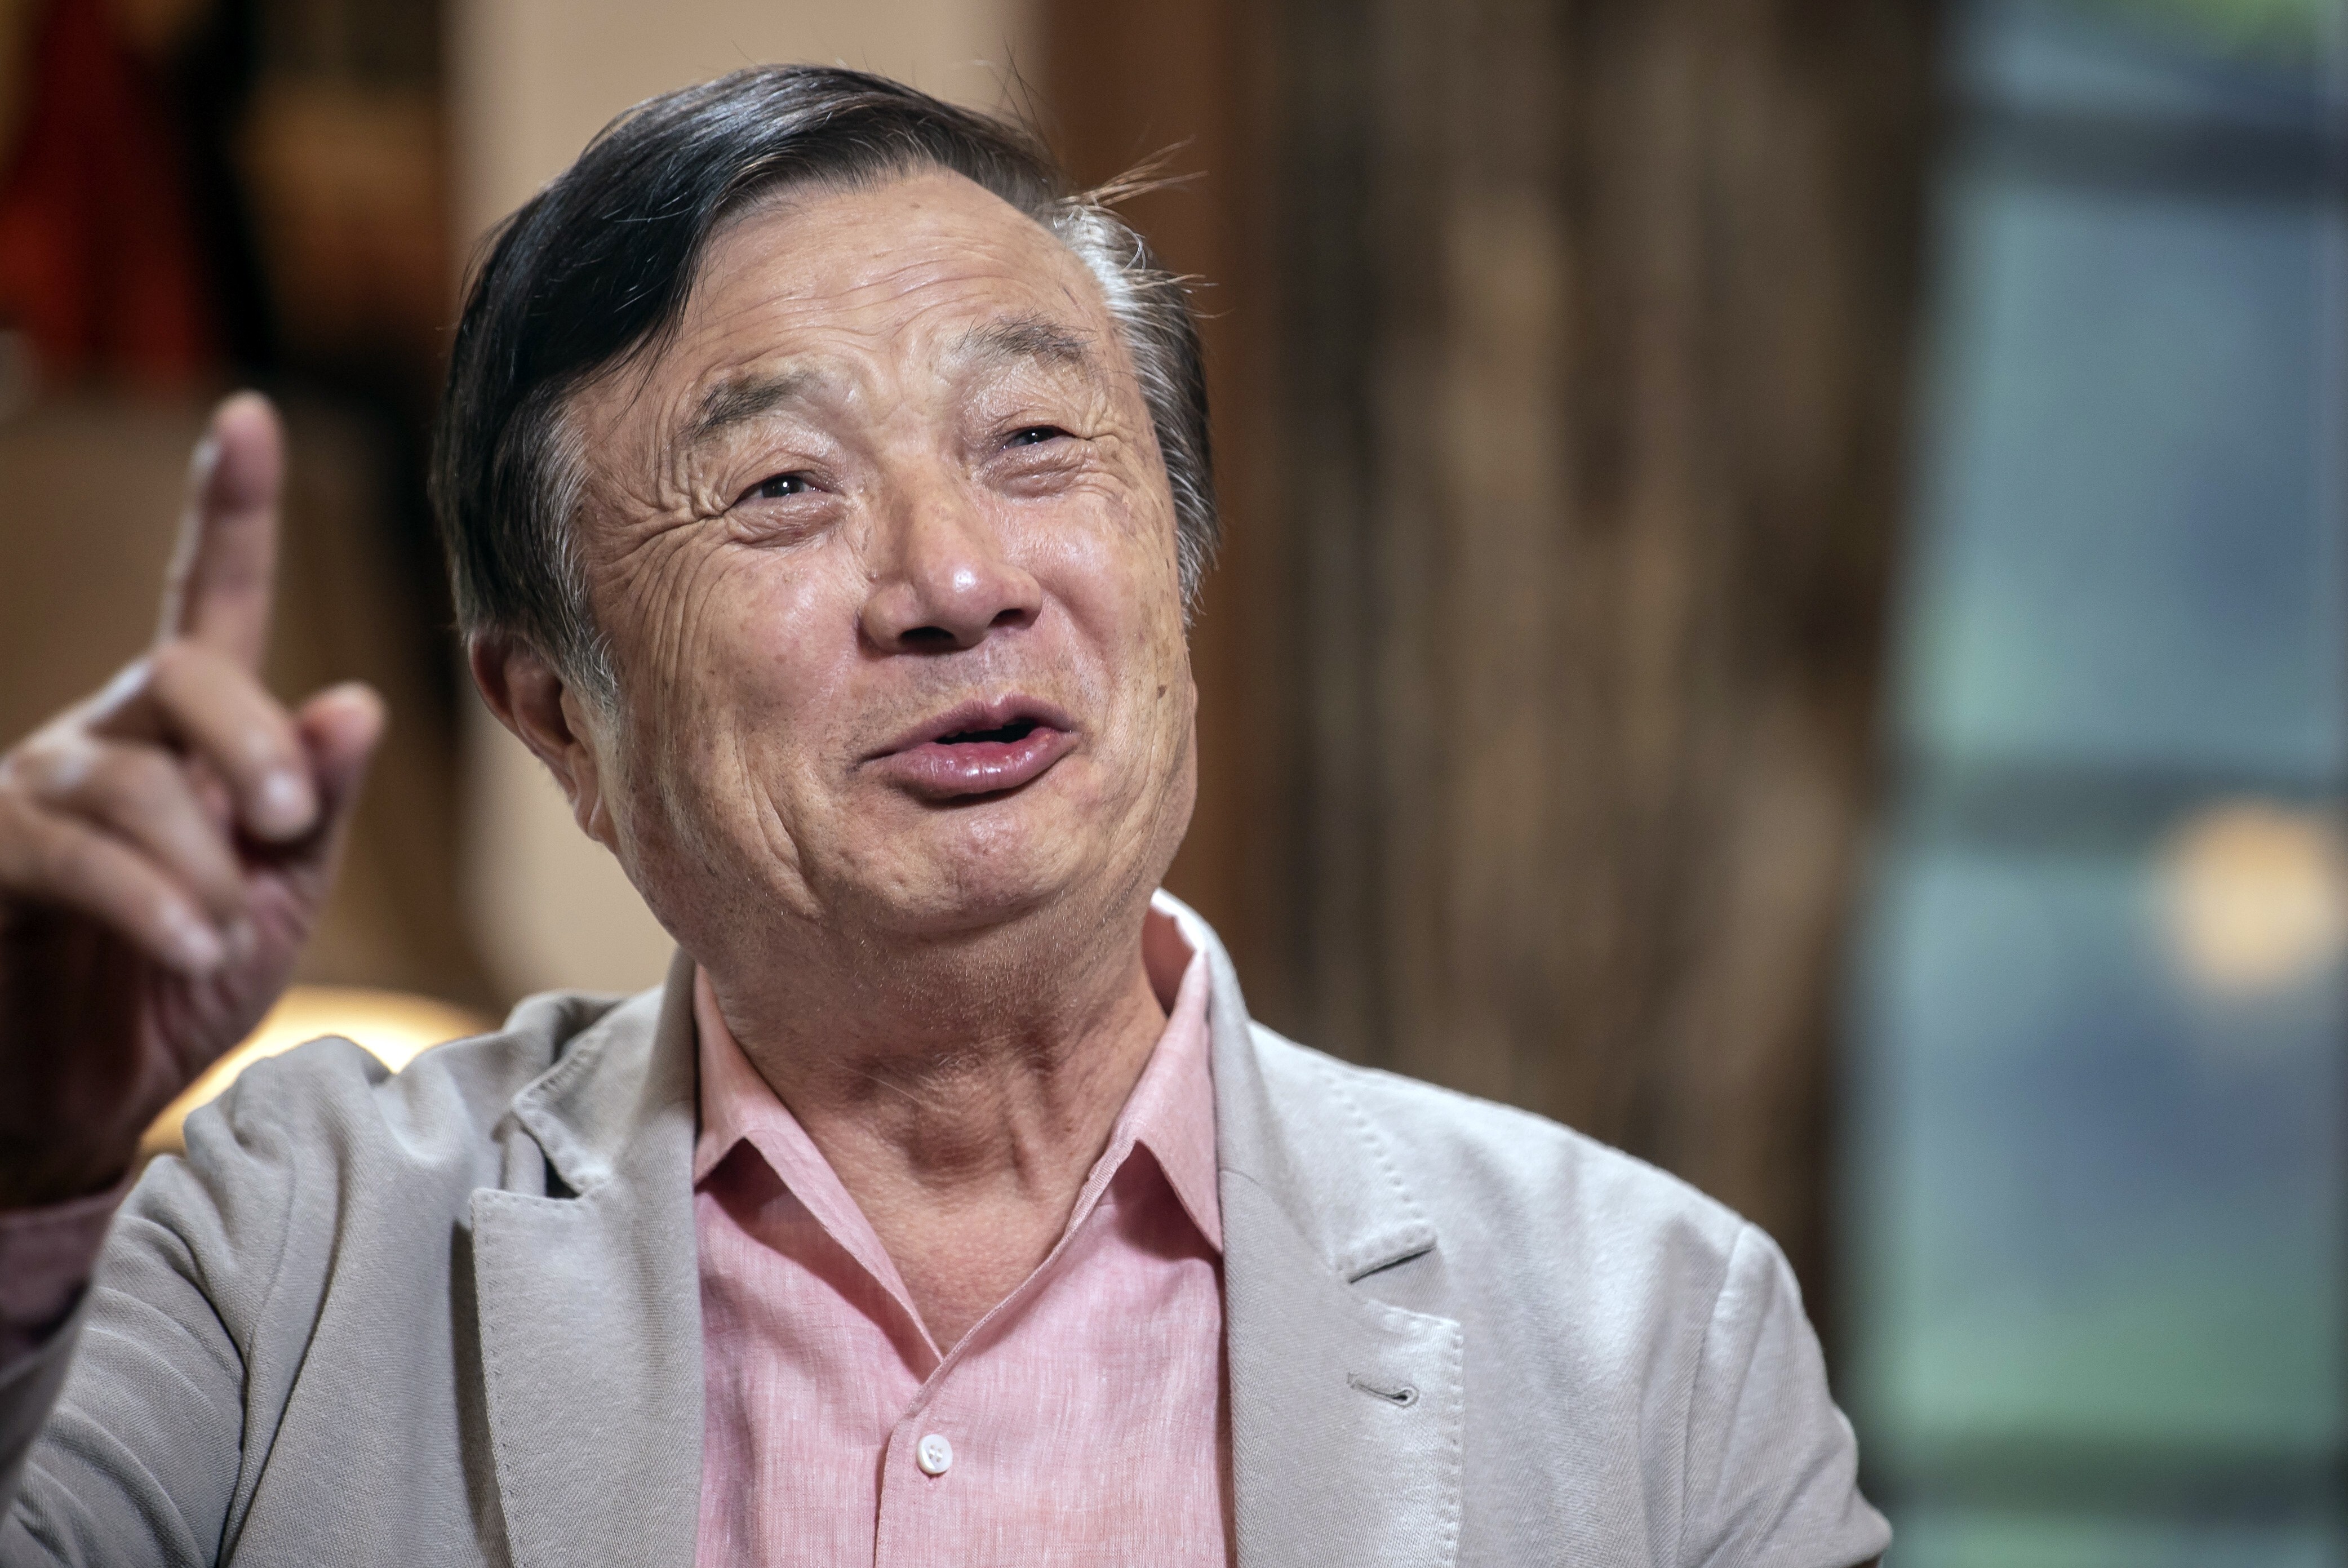 Ren Zhengfei, founder and CEO of Huawei, speaks during a Bloomberg TV interview at the company's headquarters in Shenzhen, May 24, 2019. Photo: Bloomberg